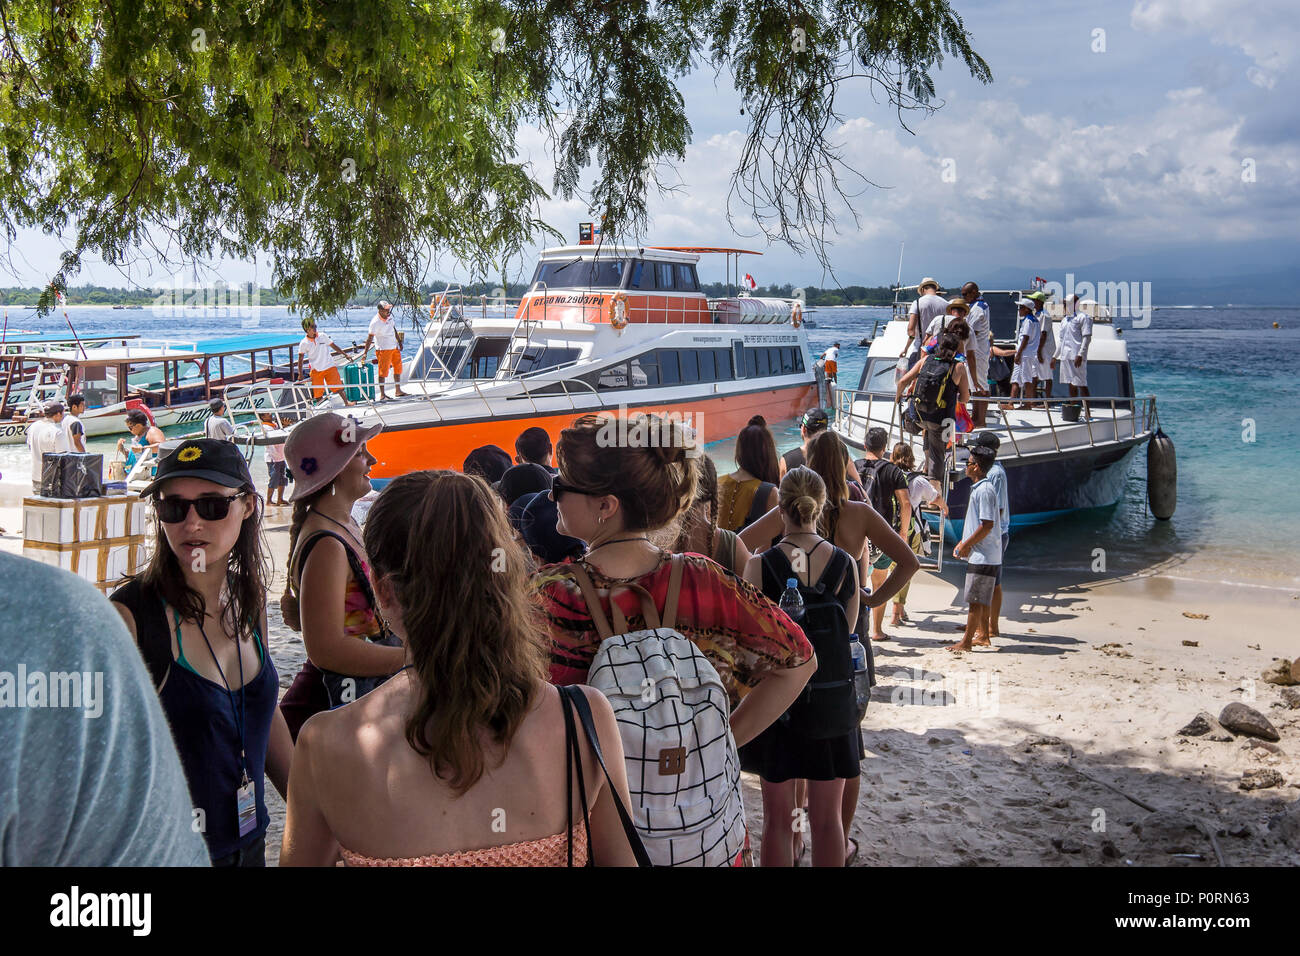 Speedboat to Bali from Gili Trawangan and Lombok, tourists standing in line, Indonesia, April 26, 2018 Stock Photo